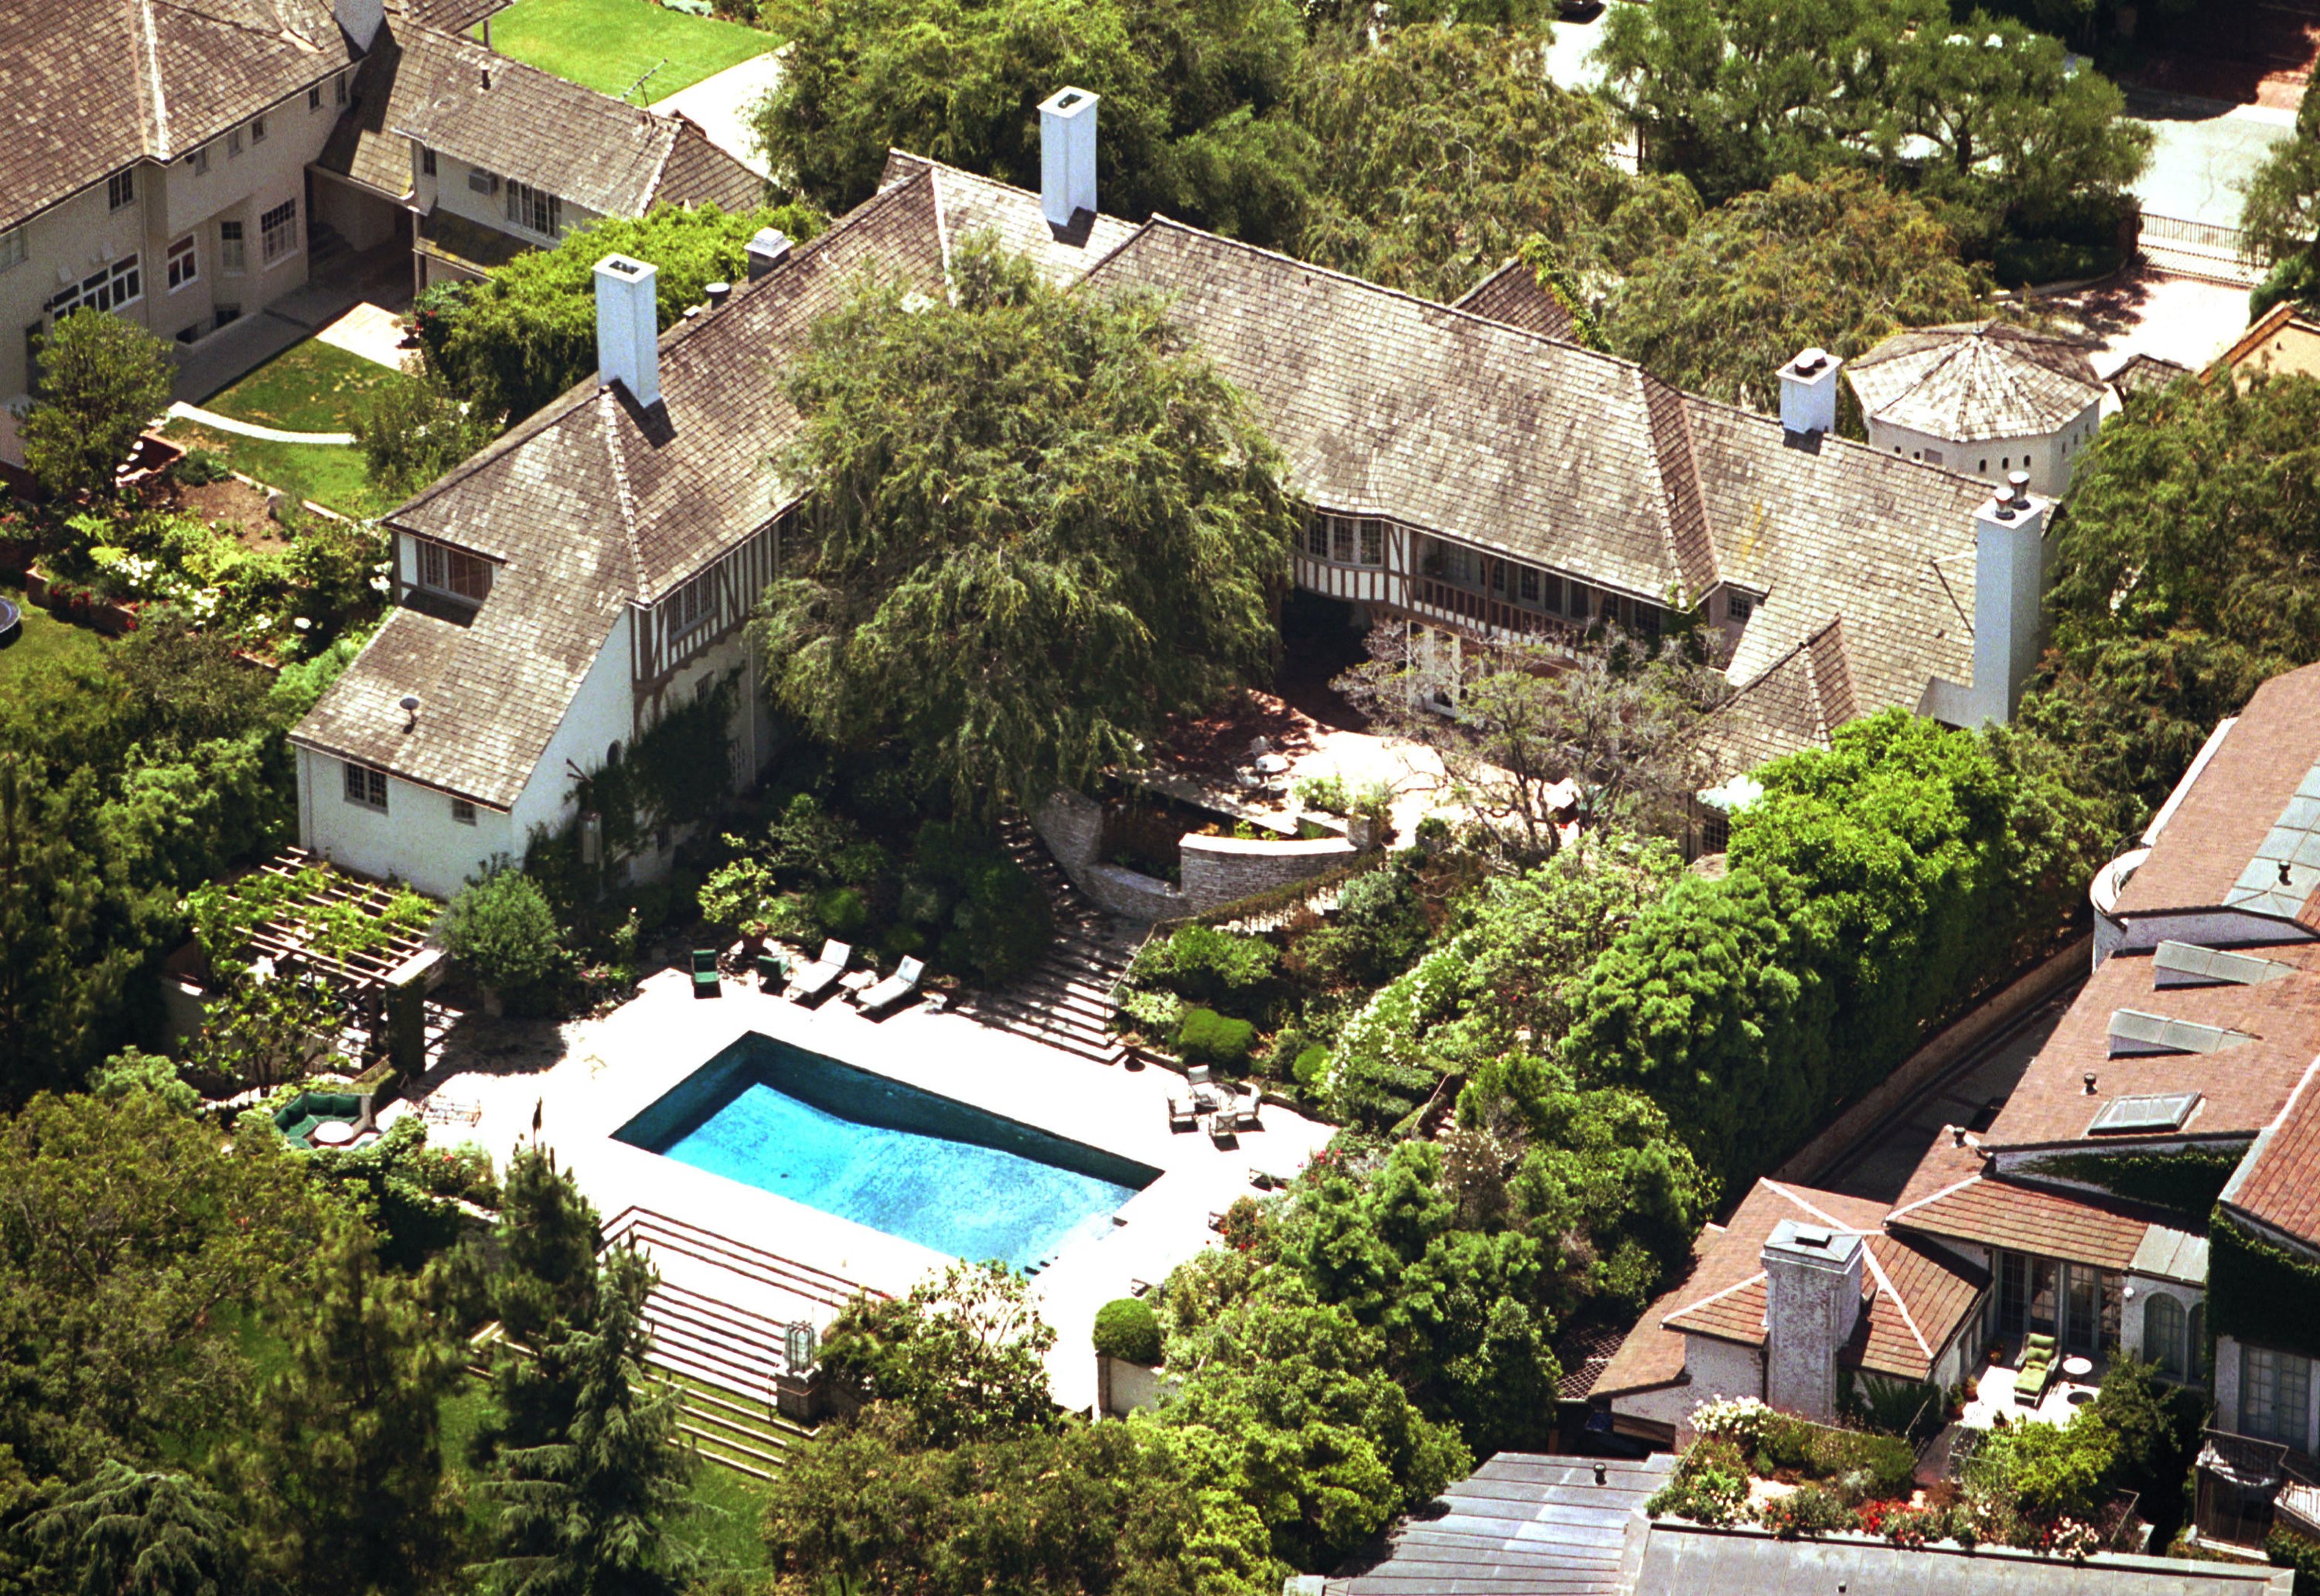 Brad Pitt and Jennifer Aniston's home seen from an aerial view on June 18, 2001, in Malibu, California | Source: Getty Images